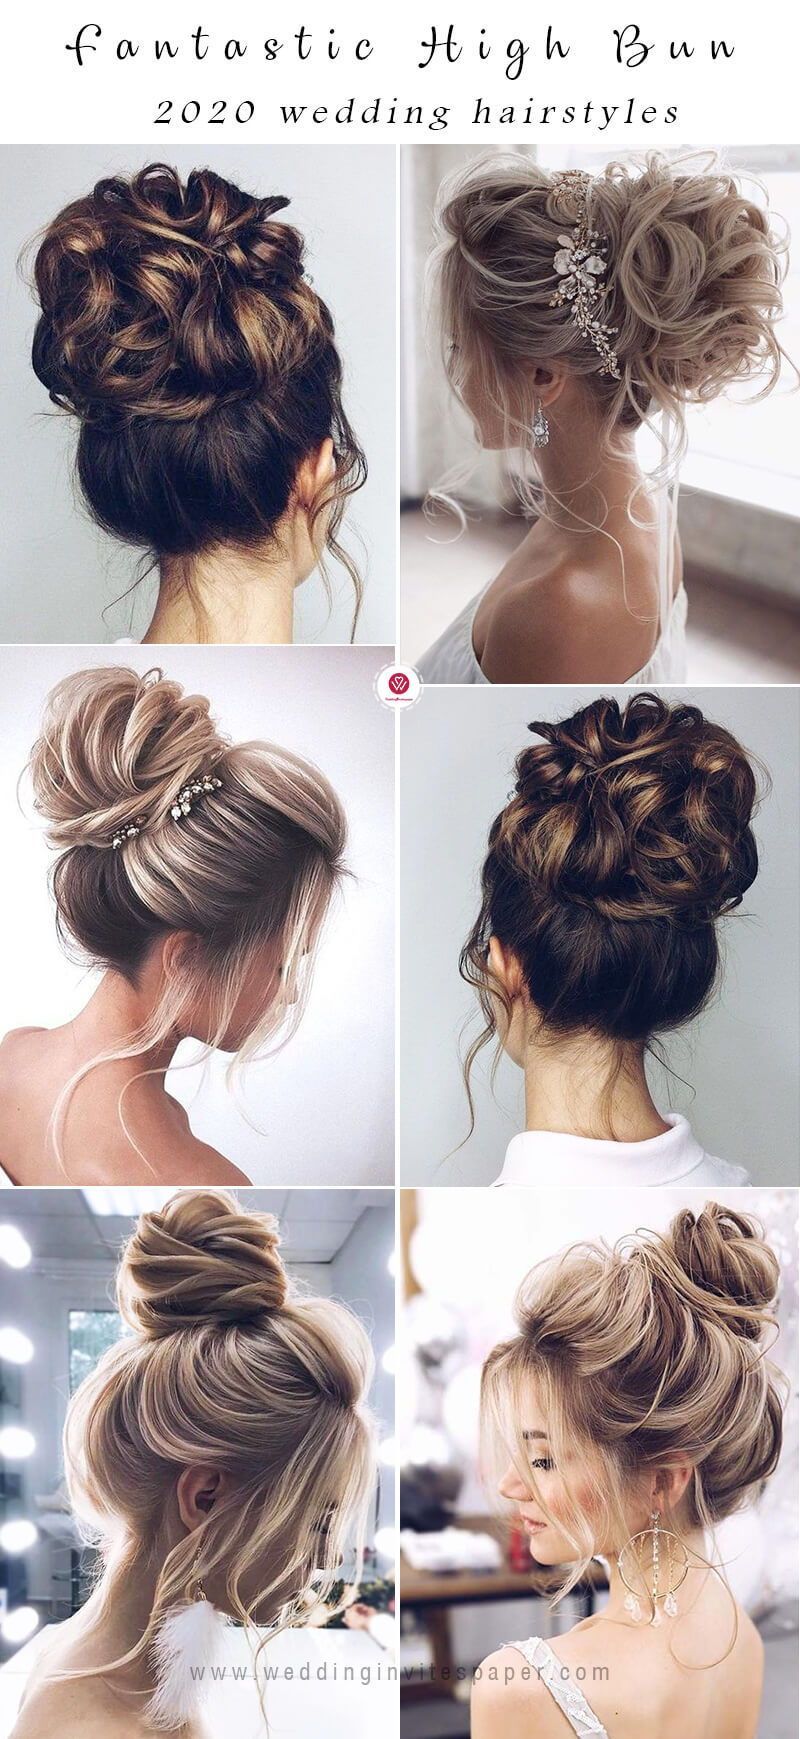 47 Romantic and Easy Updo Wedding Hairstyles for 2020 -   10 makeup Bridal messy buns ideas